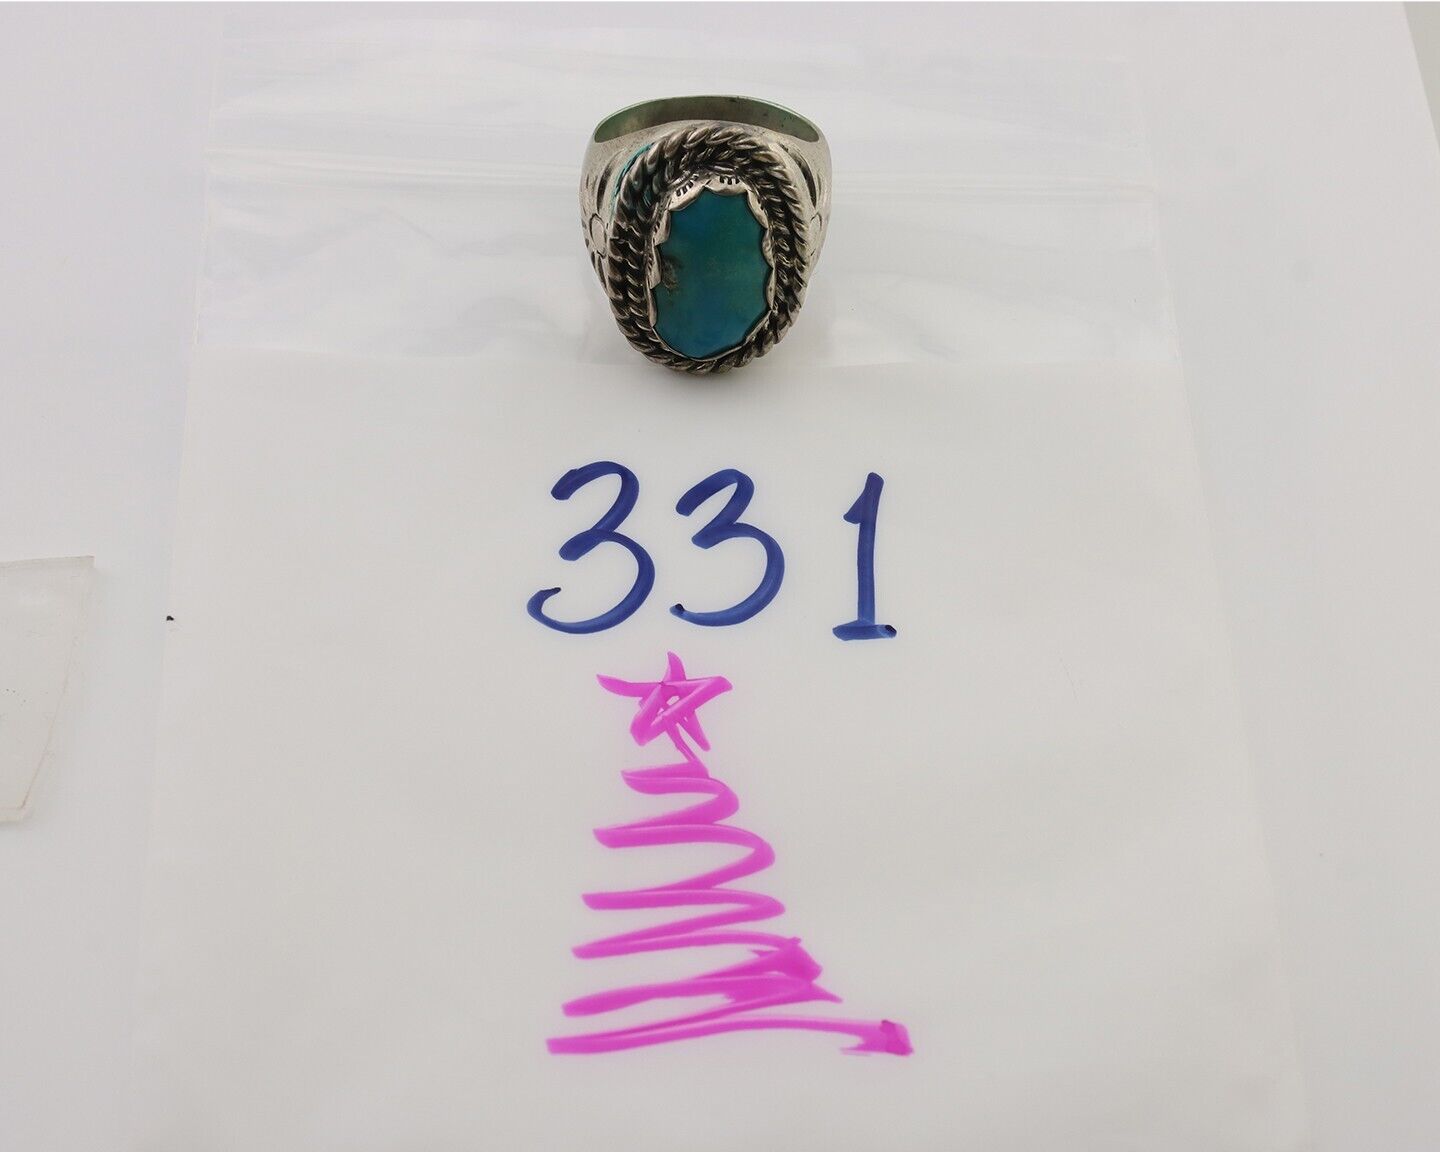 Mens Navajo Ring 925 Silver Turquoise Artist Signed Tipi & Crossed Arrows C.80's